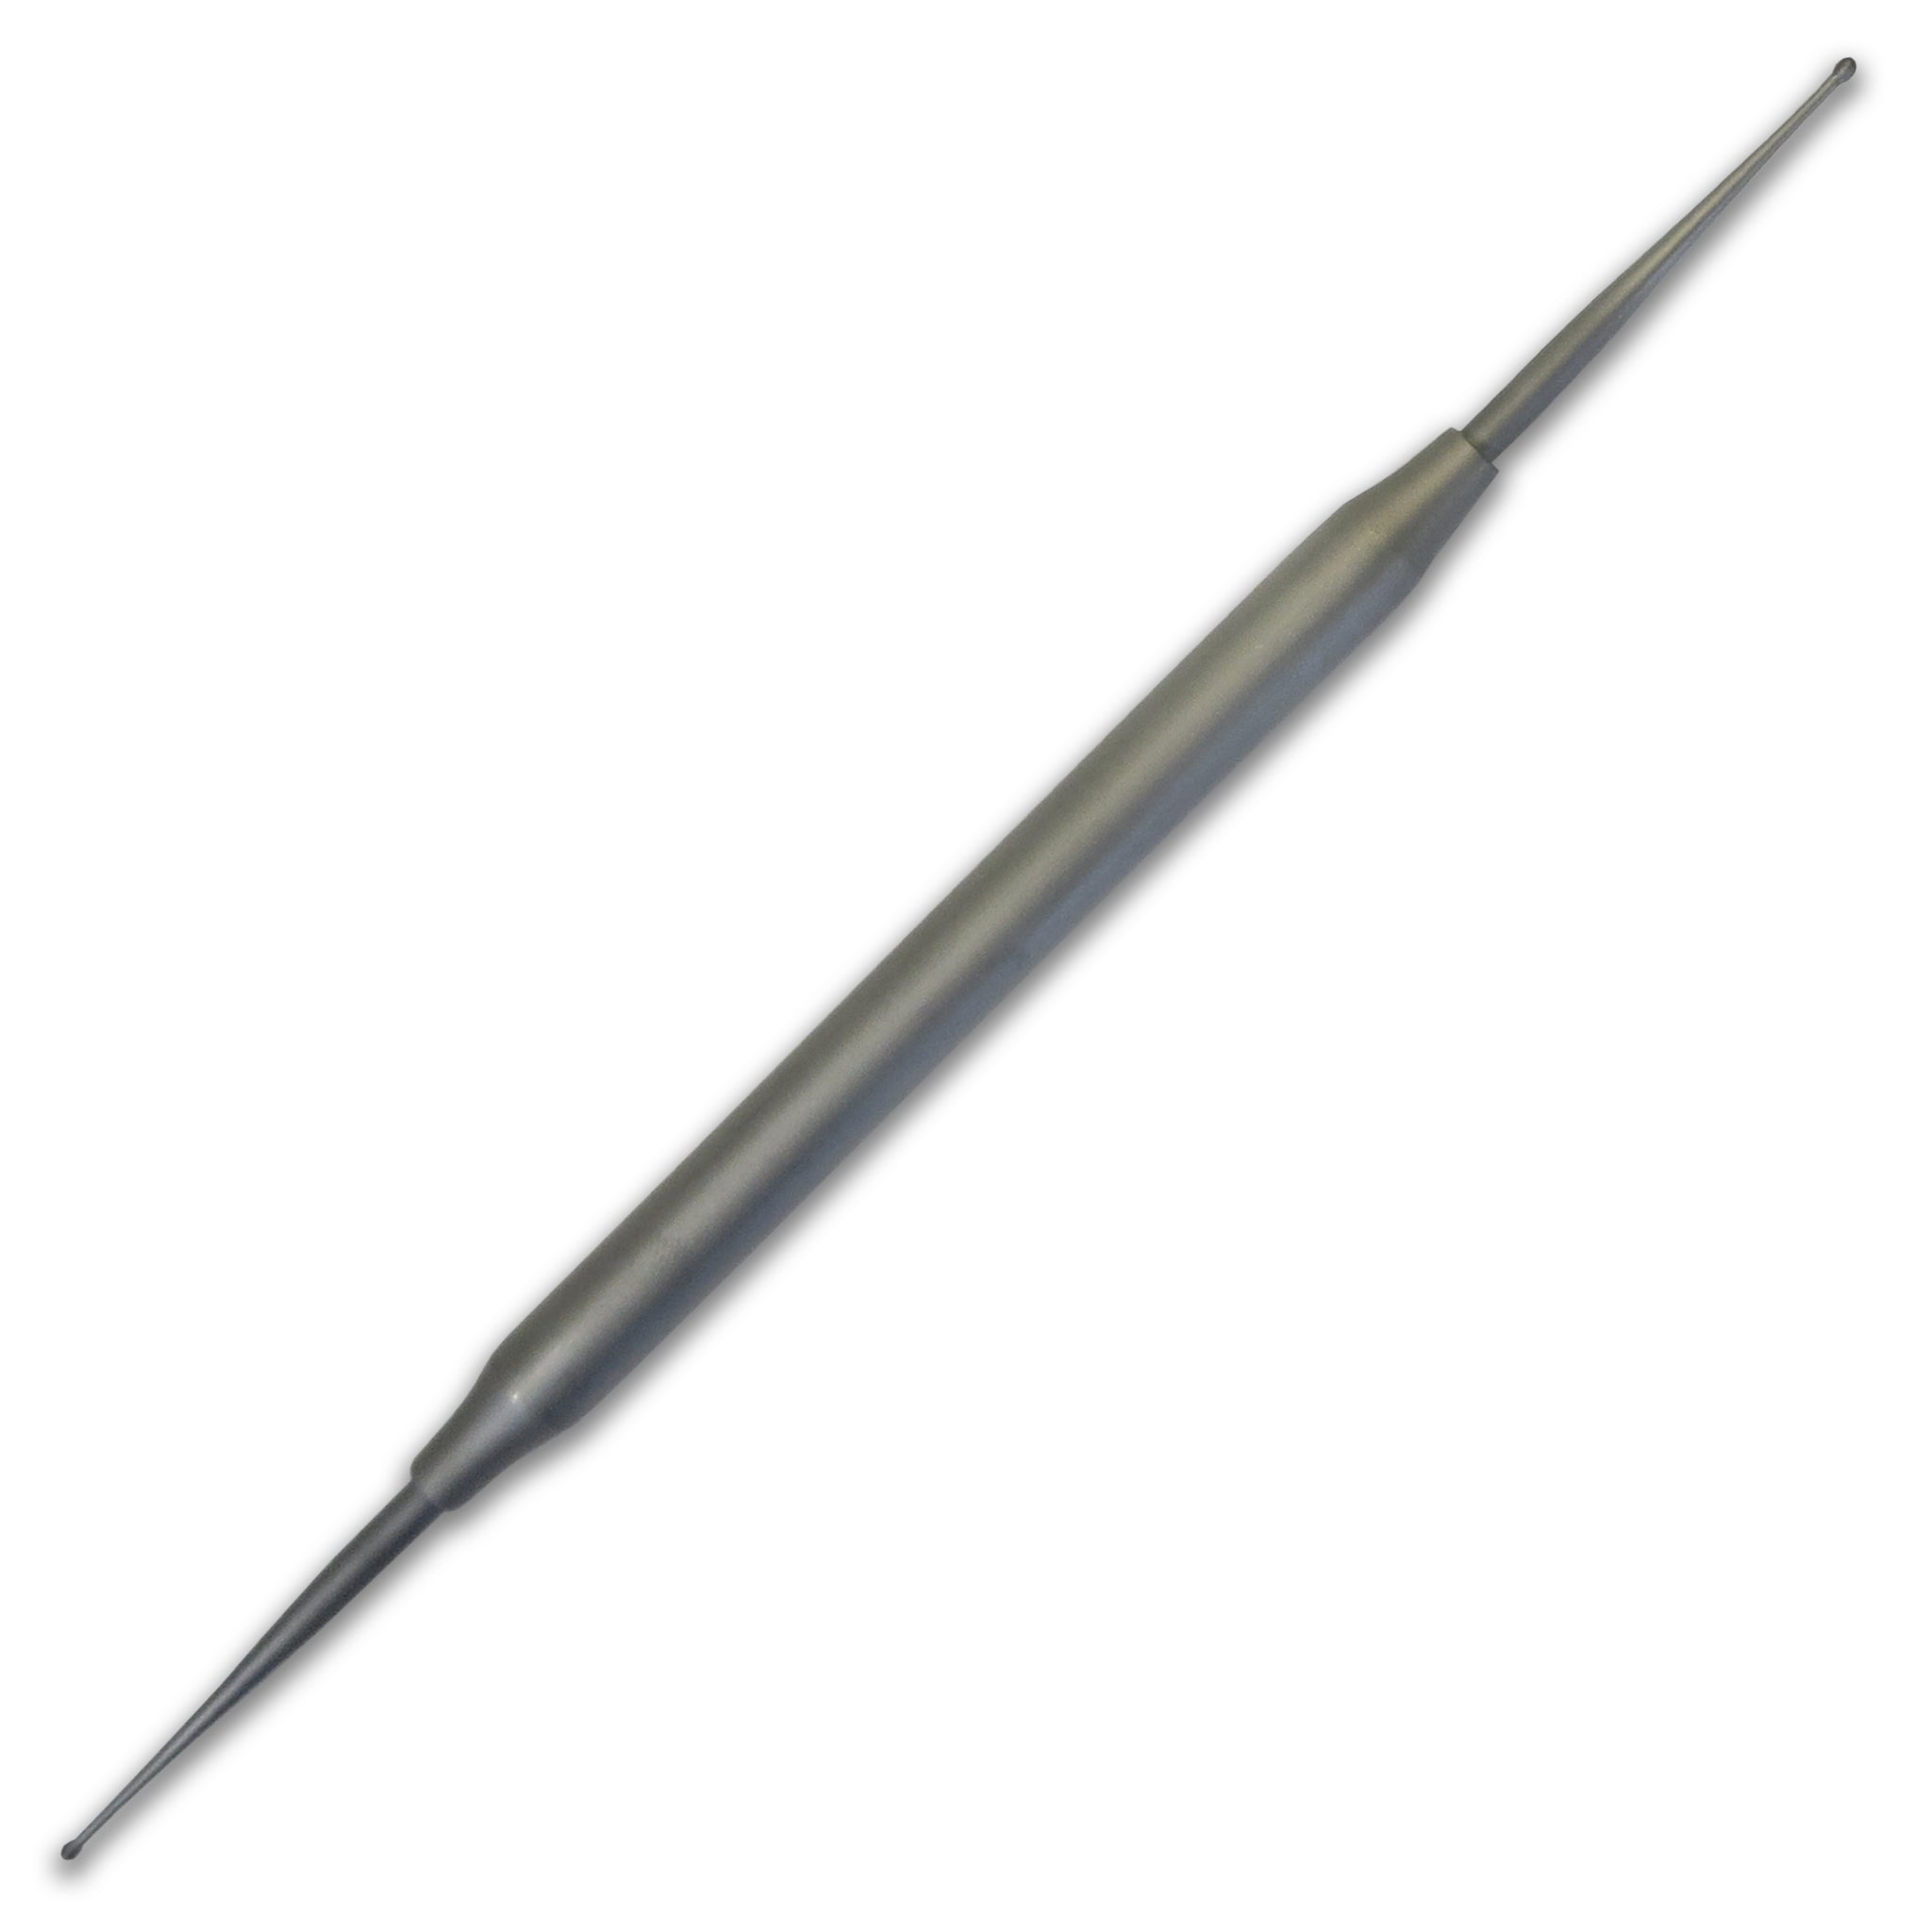 Double Ball Stylus Very Small 1mm & 1.25mm EIC1811